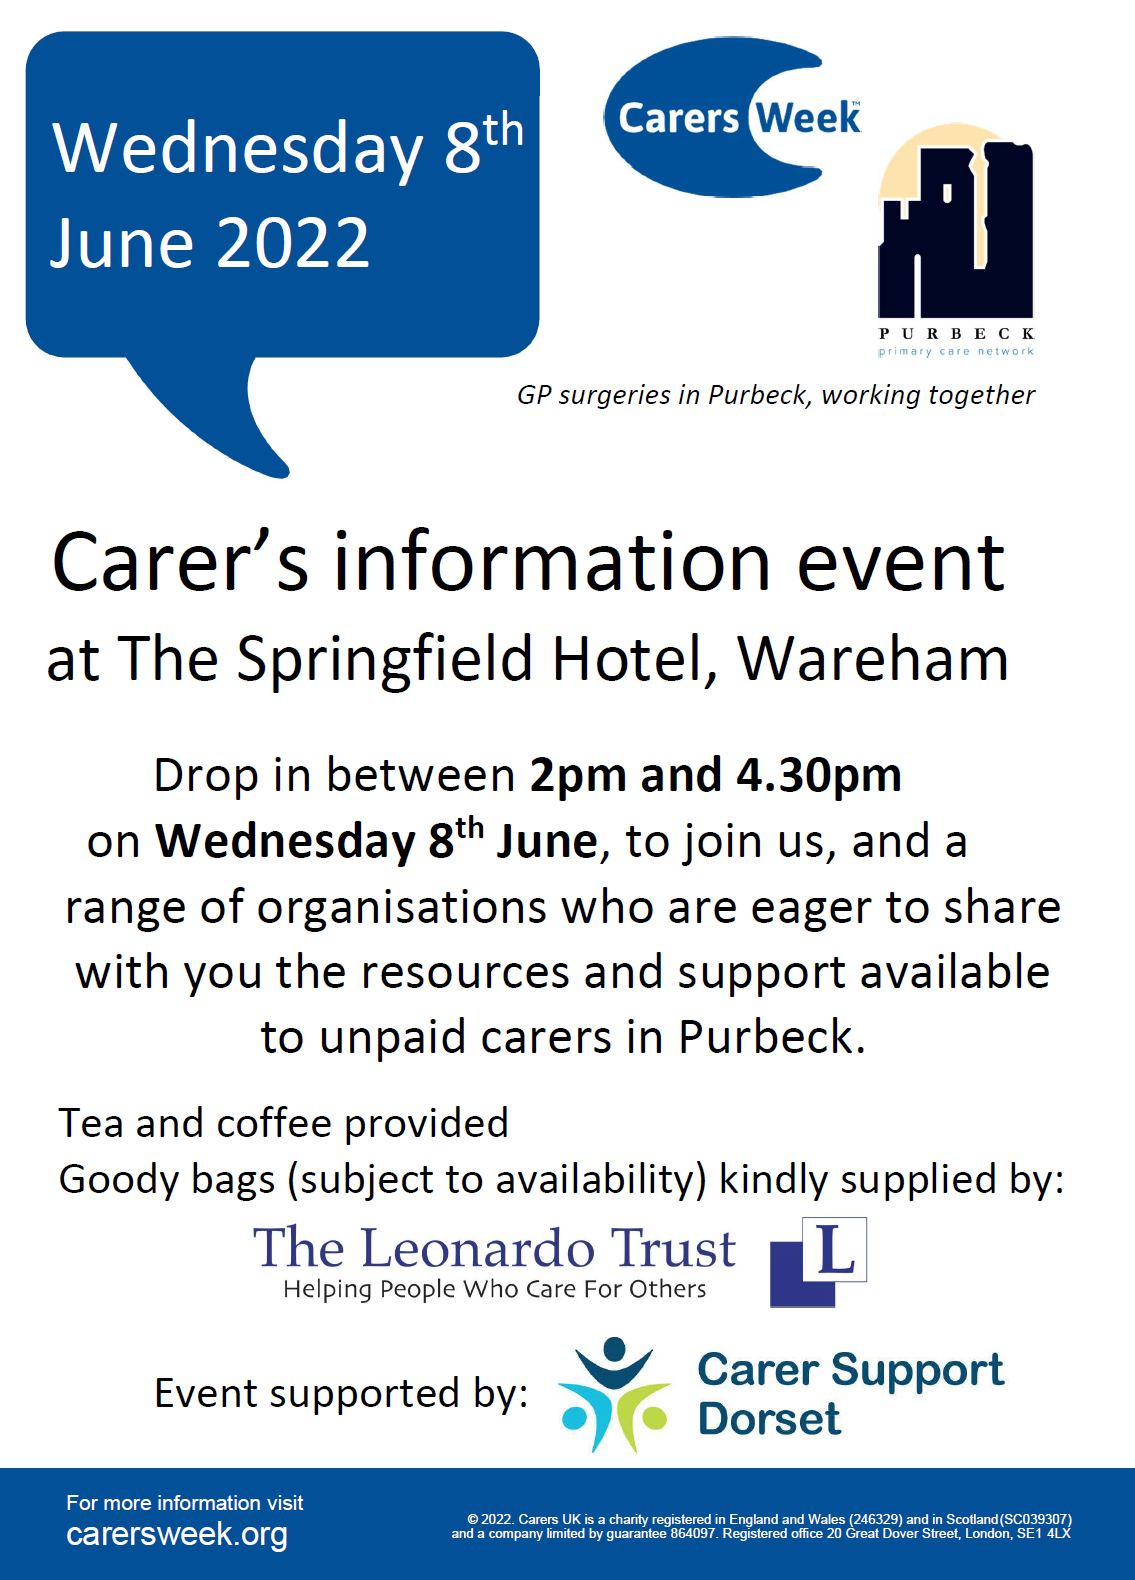 poster event 8th June 14:00 - 16:30 at the Springfield Hotel